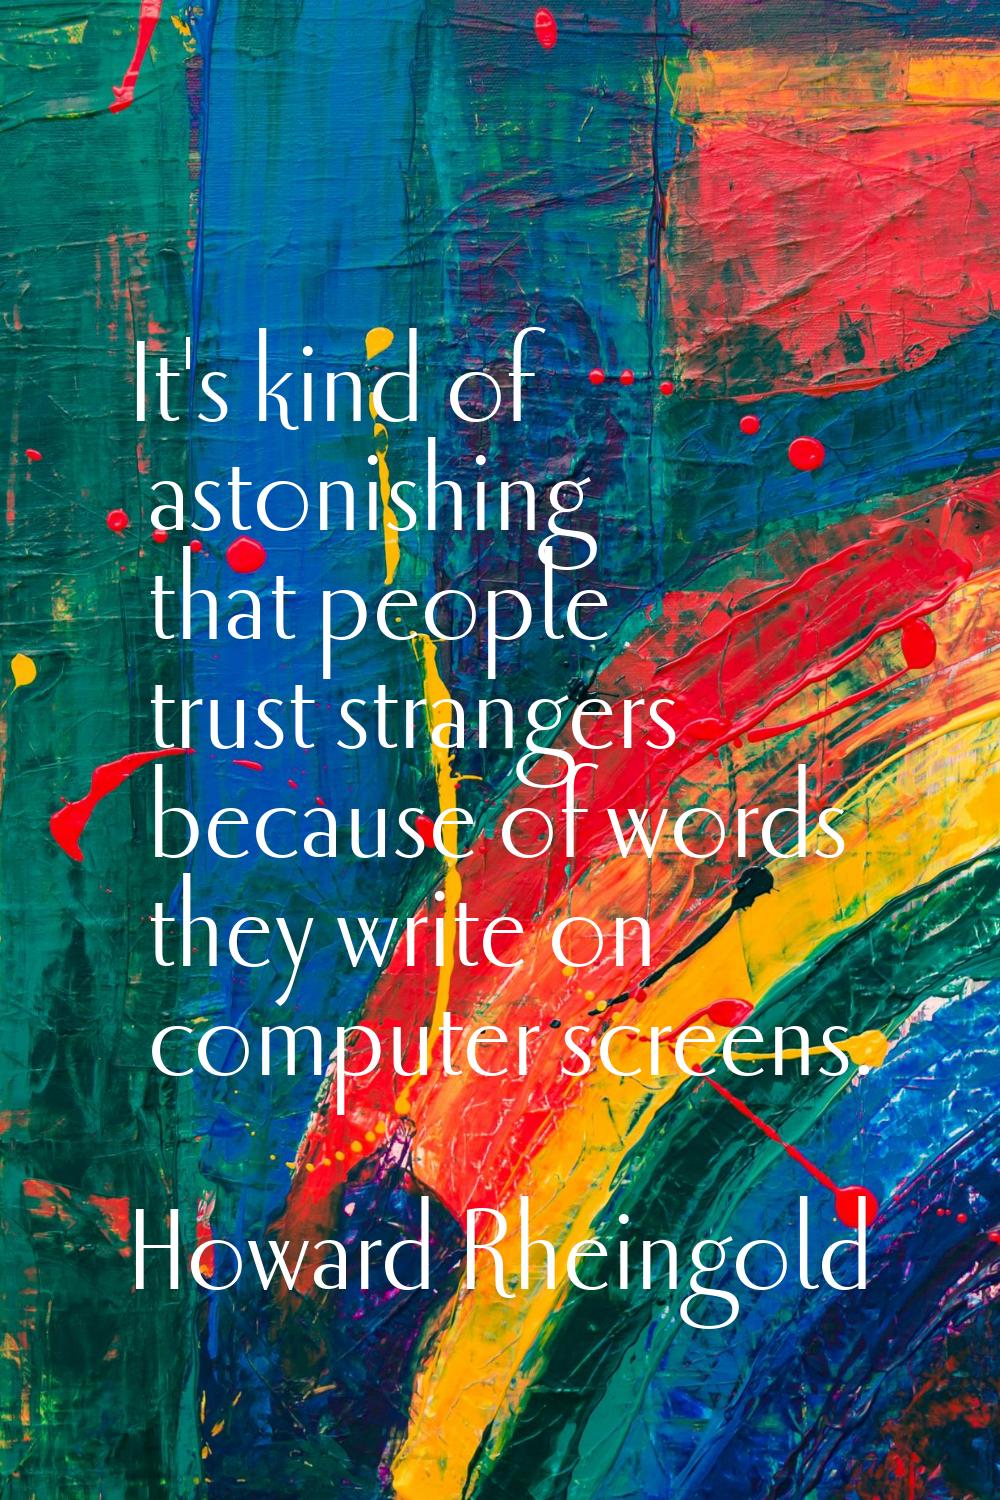 It's kind of astonishing that people trust strangers because of words they write on computer screen